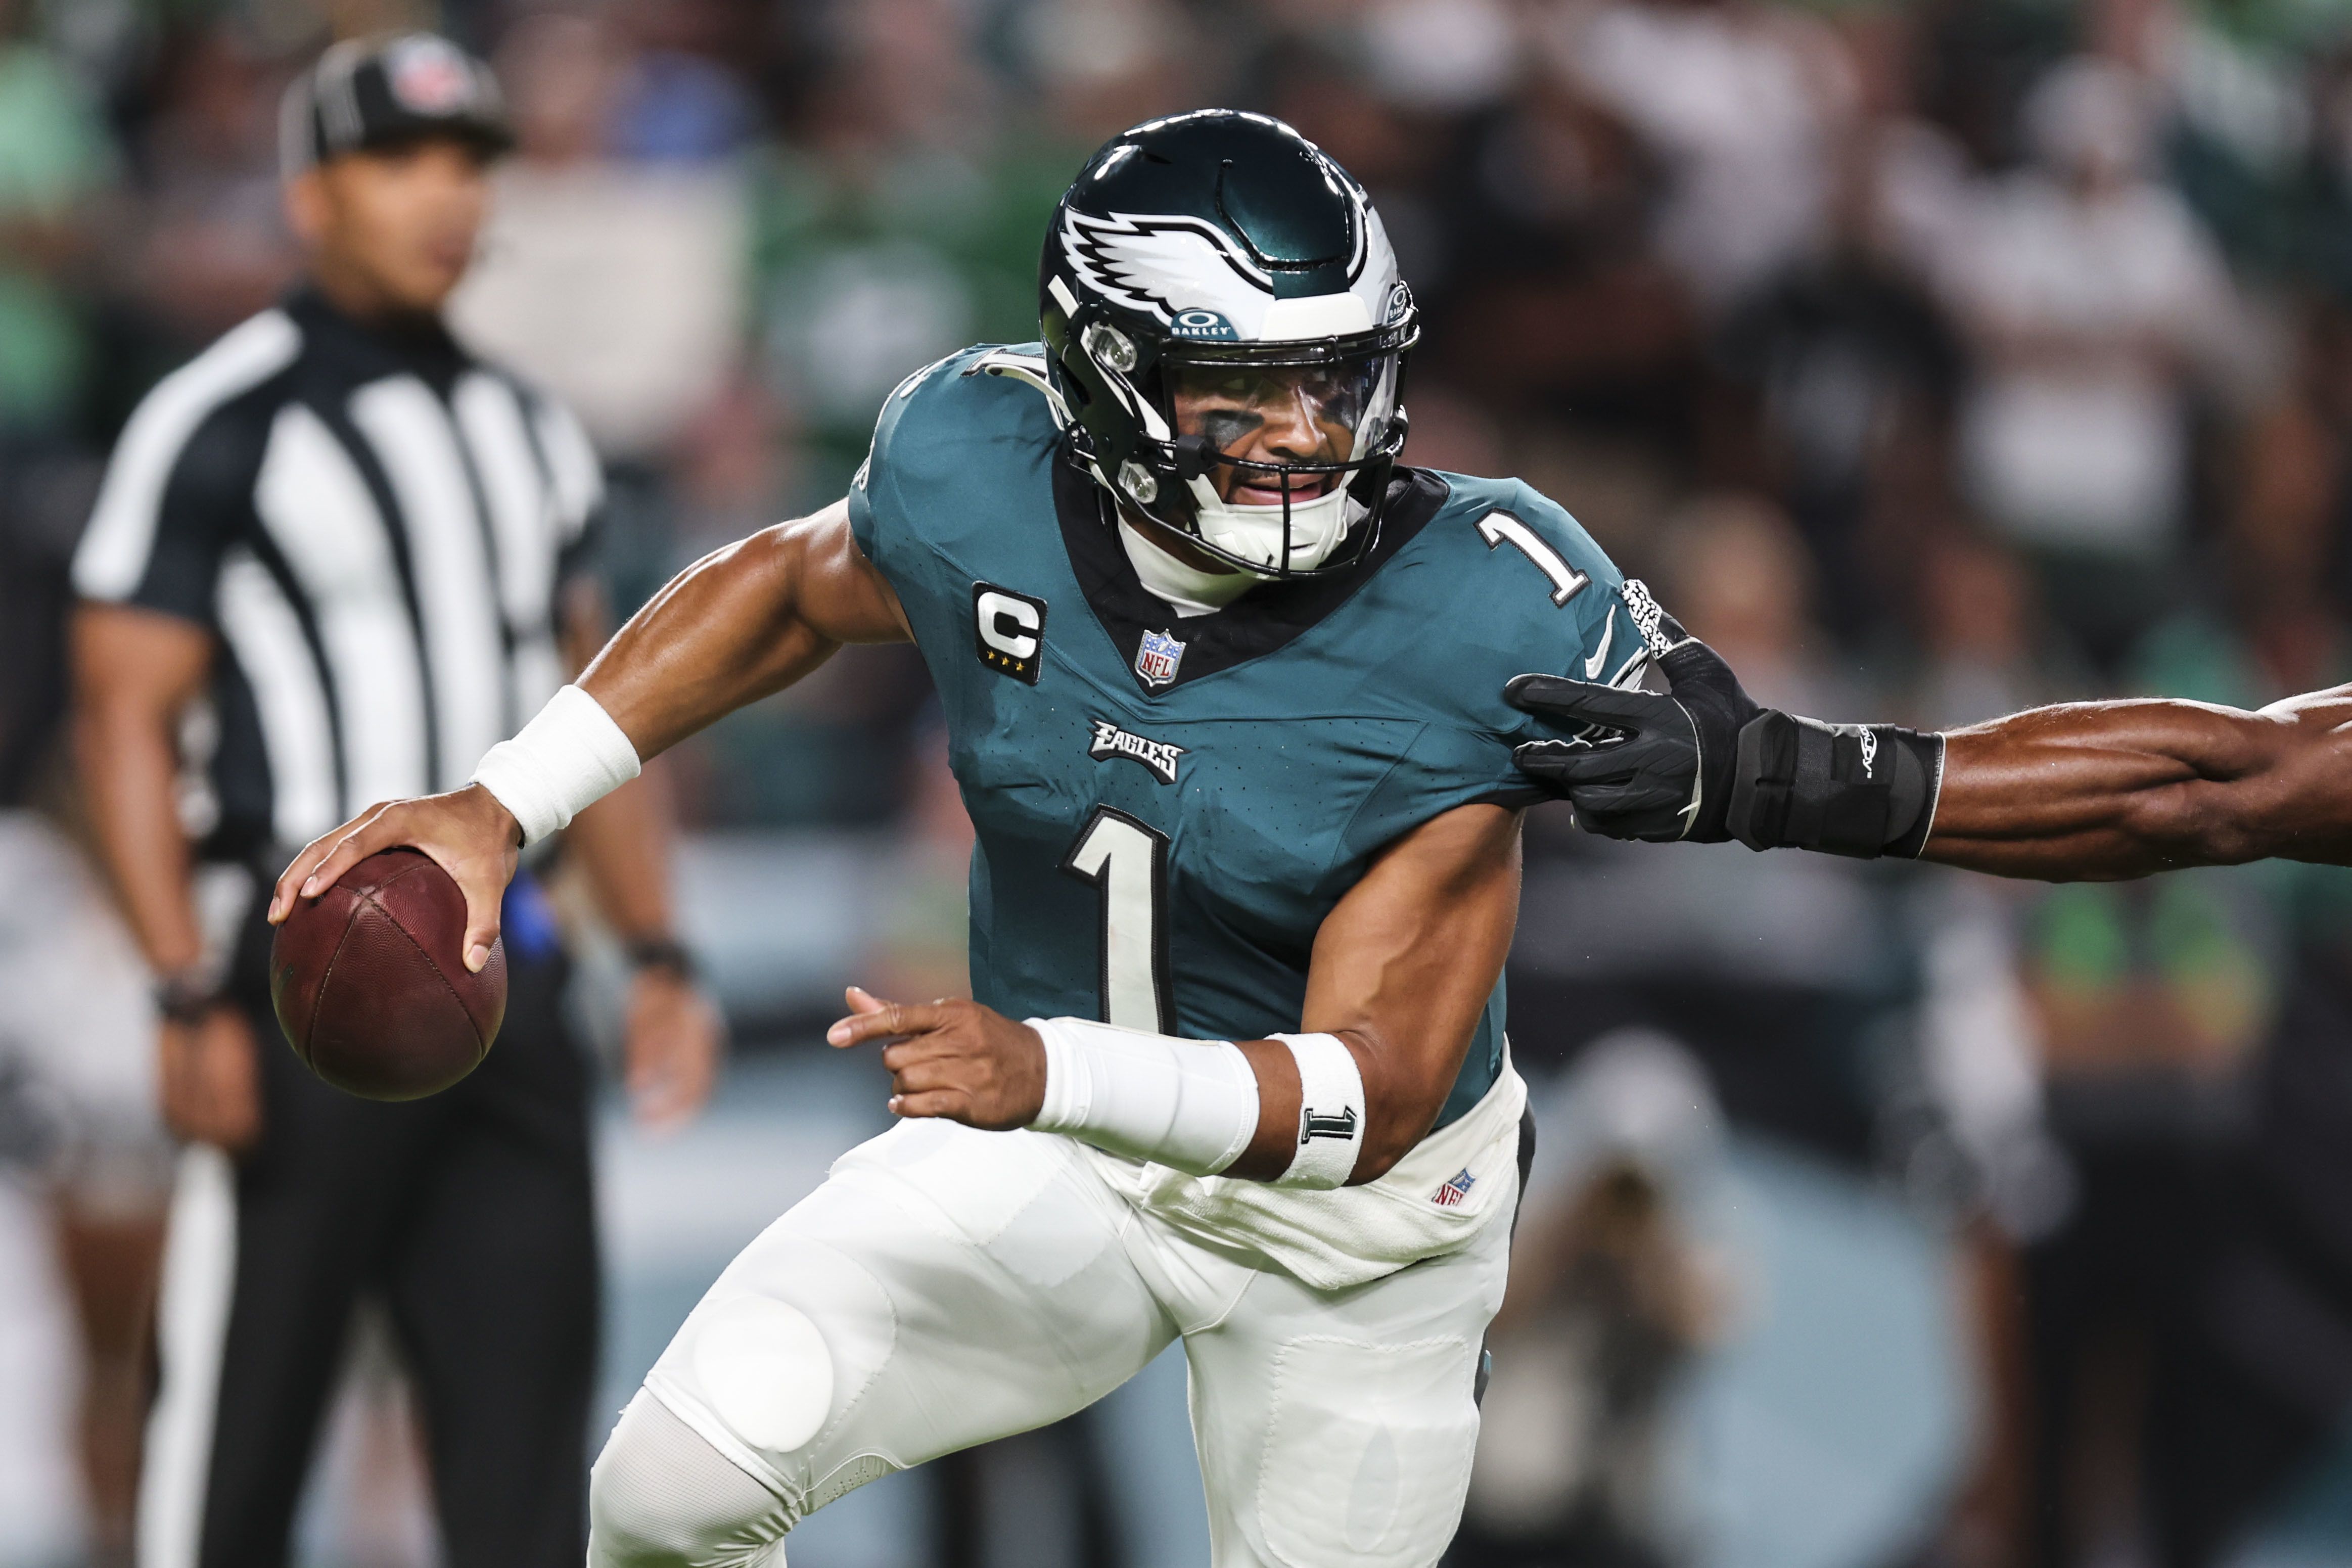 NFL contenders will rue the day that teams let the 2-0 Eagles off